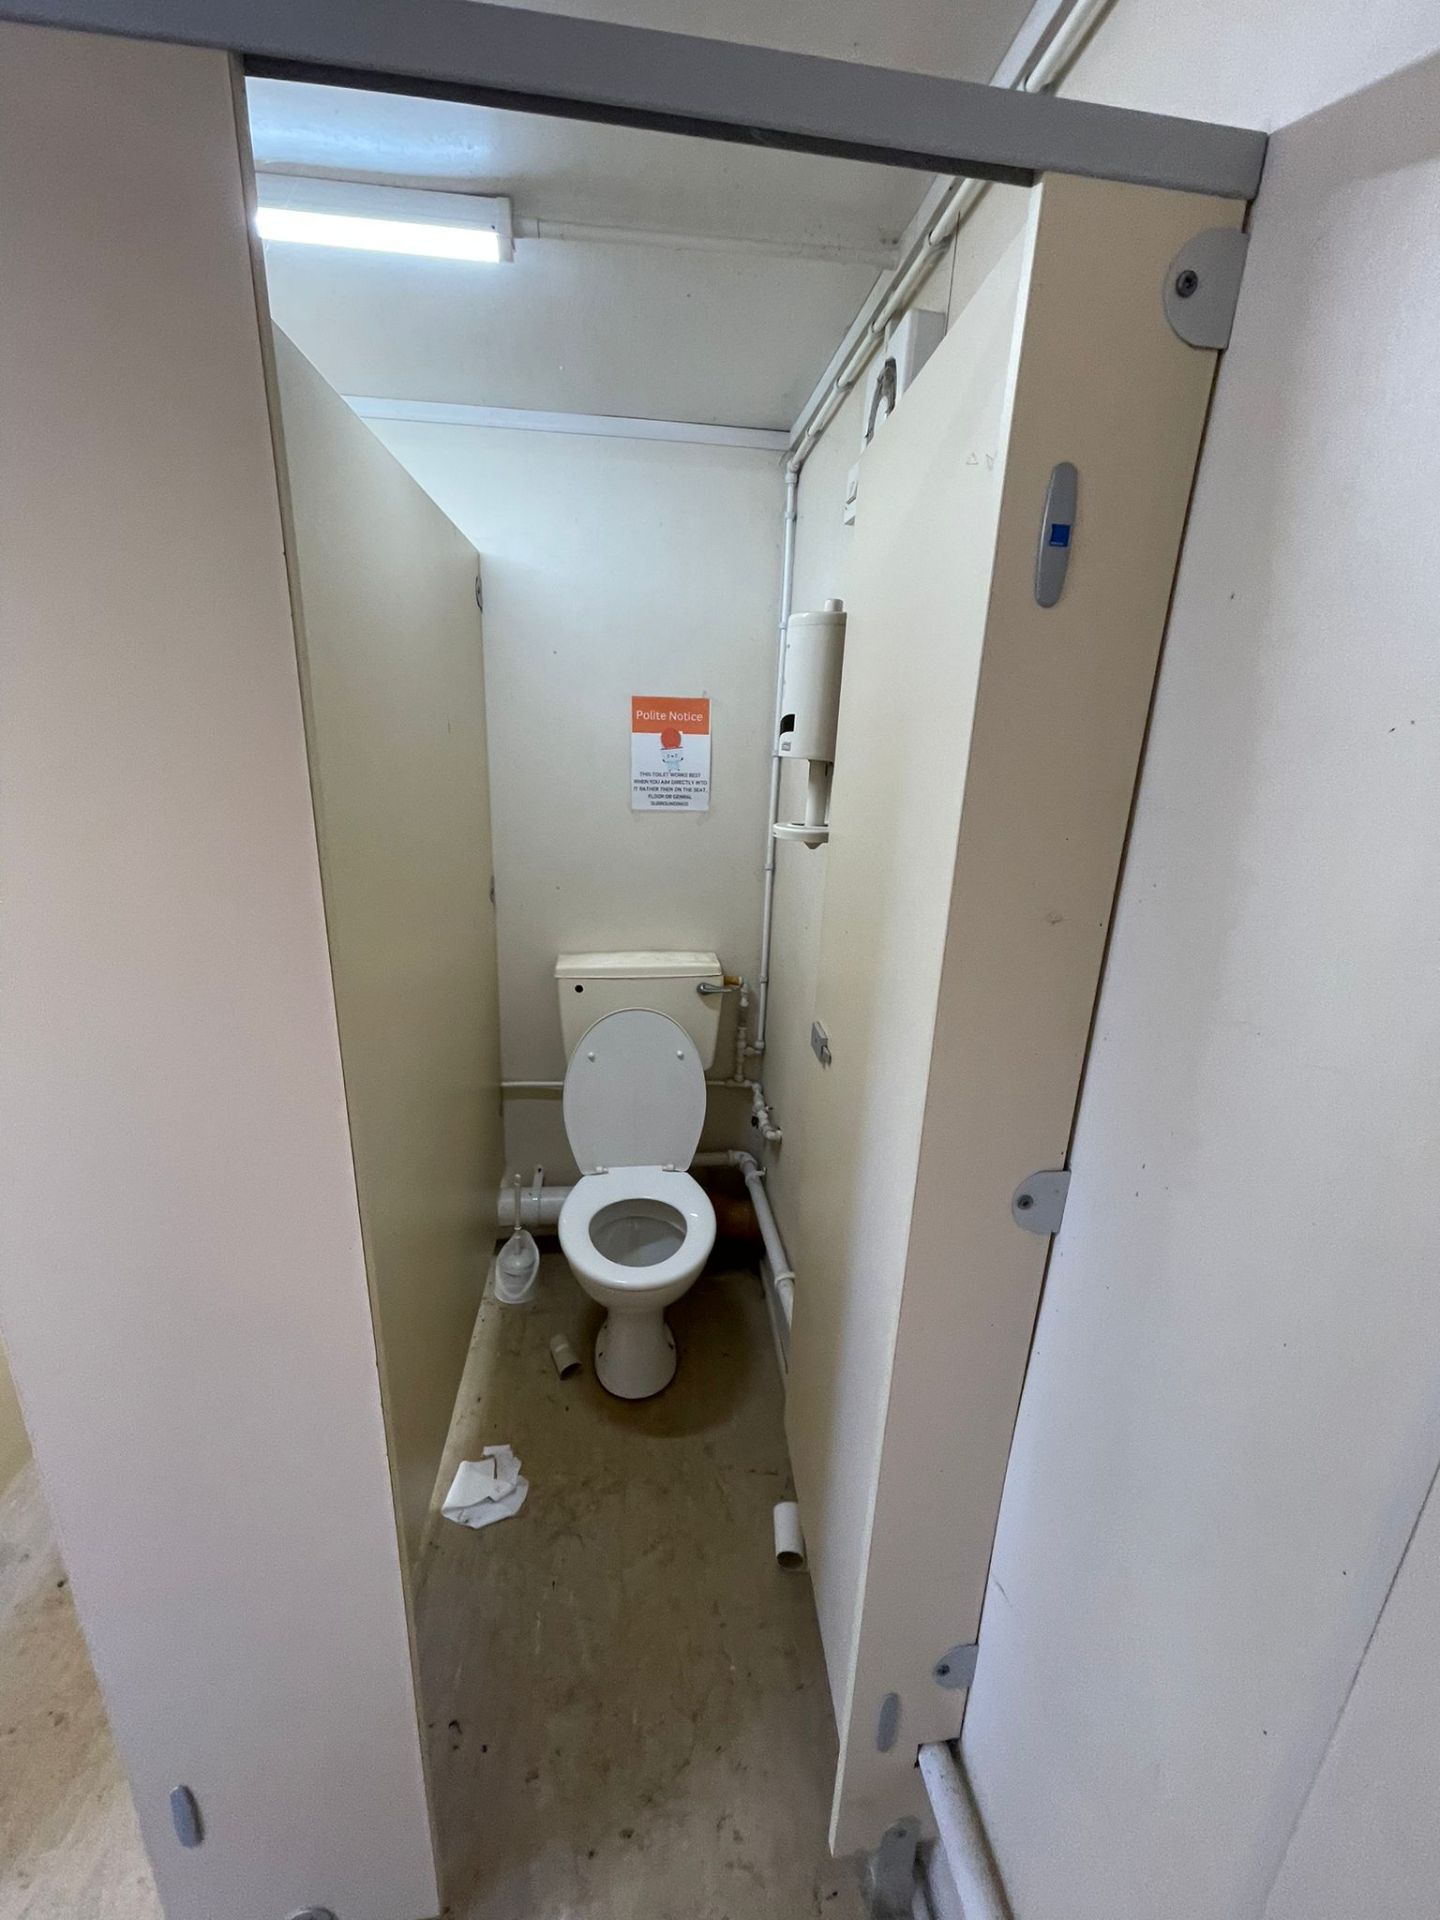 16X10FT TOILET BLOCK - 1X DISABLED/WOMEN’S TOILET - 3X MALES TOILET AND 3X URINALS - Image 2 of 8